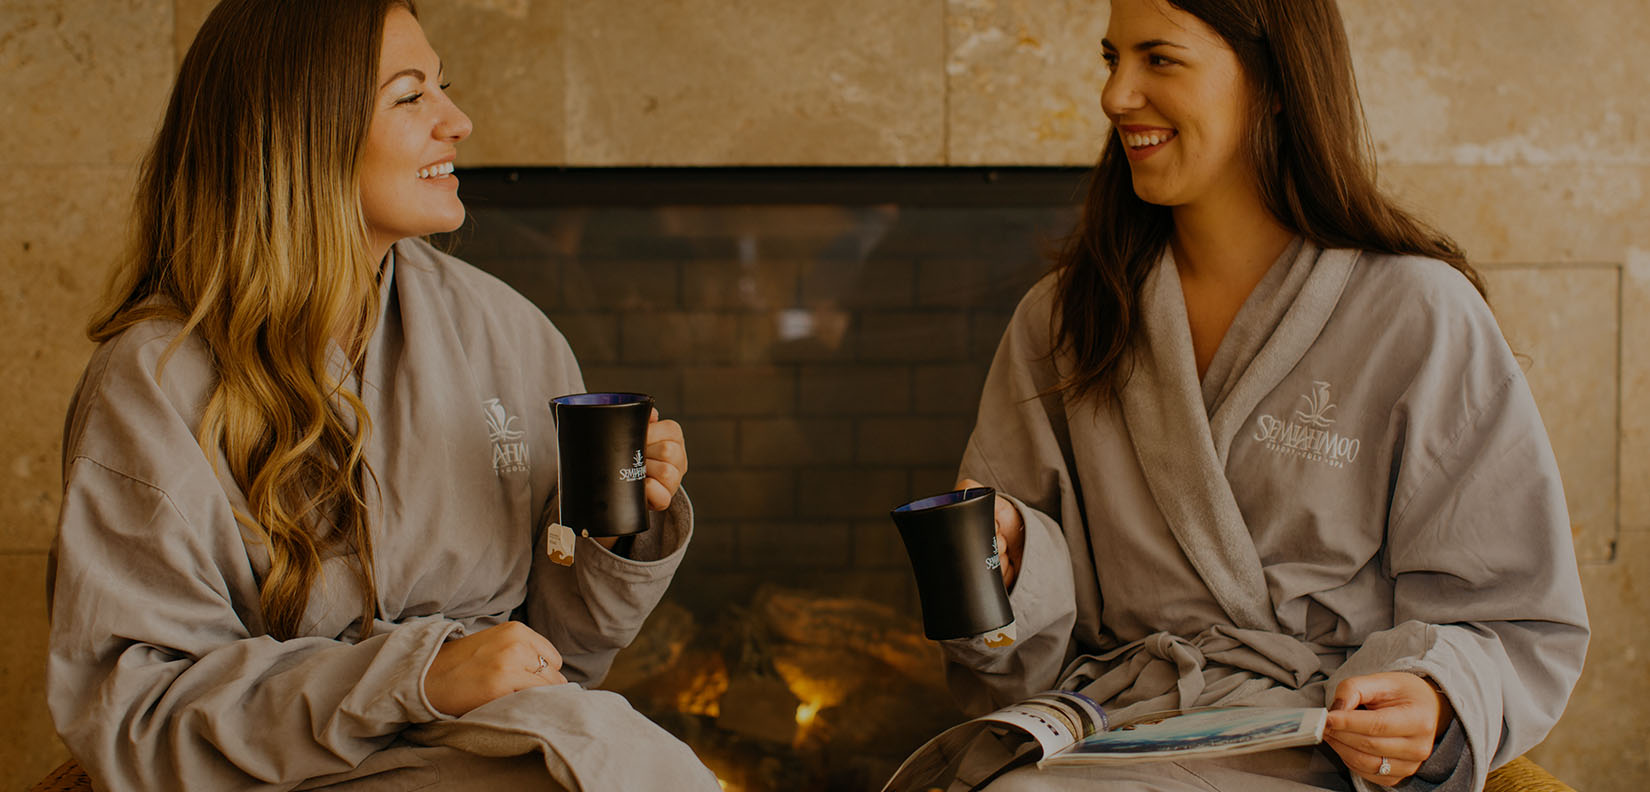 dtwo women in spa robes